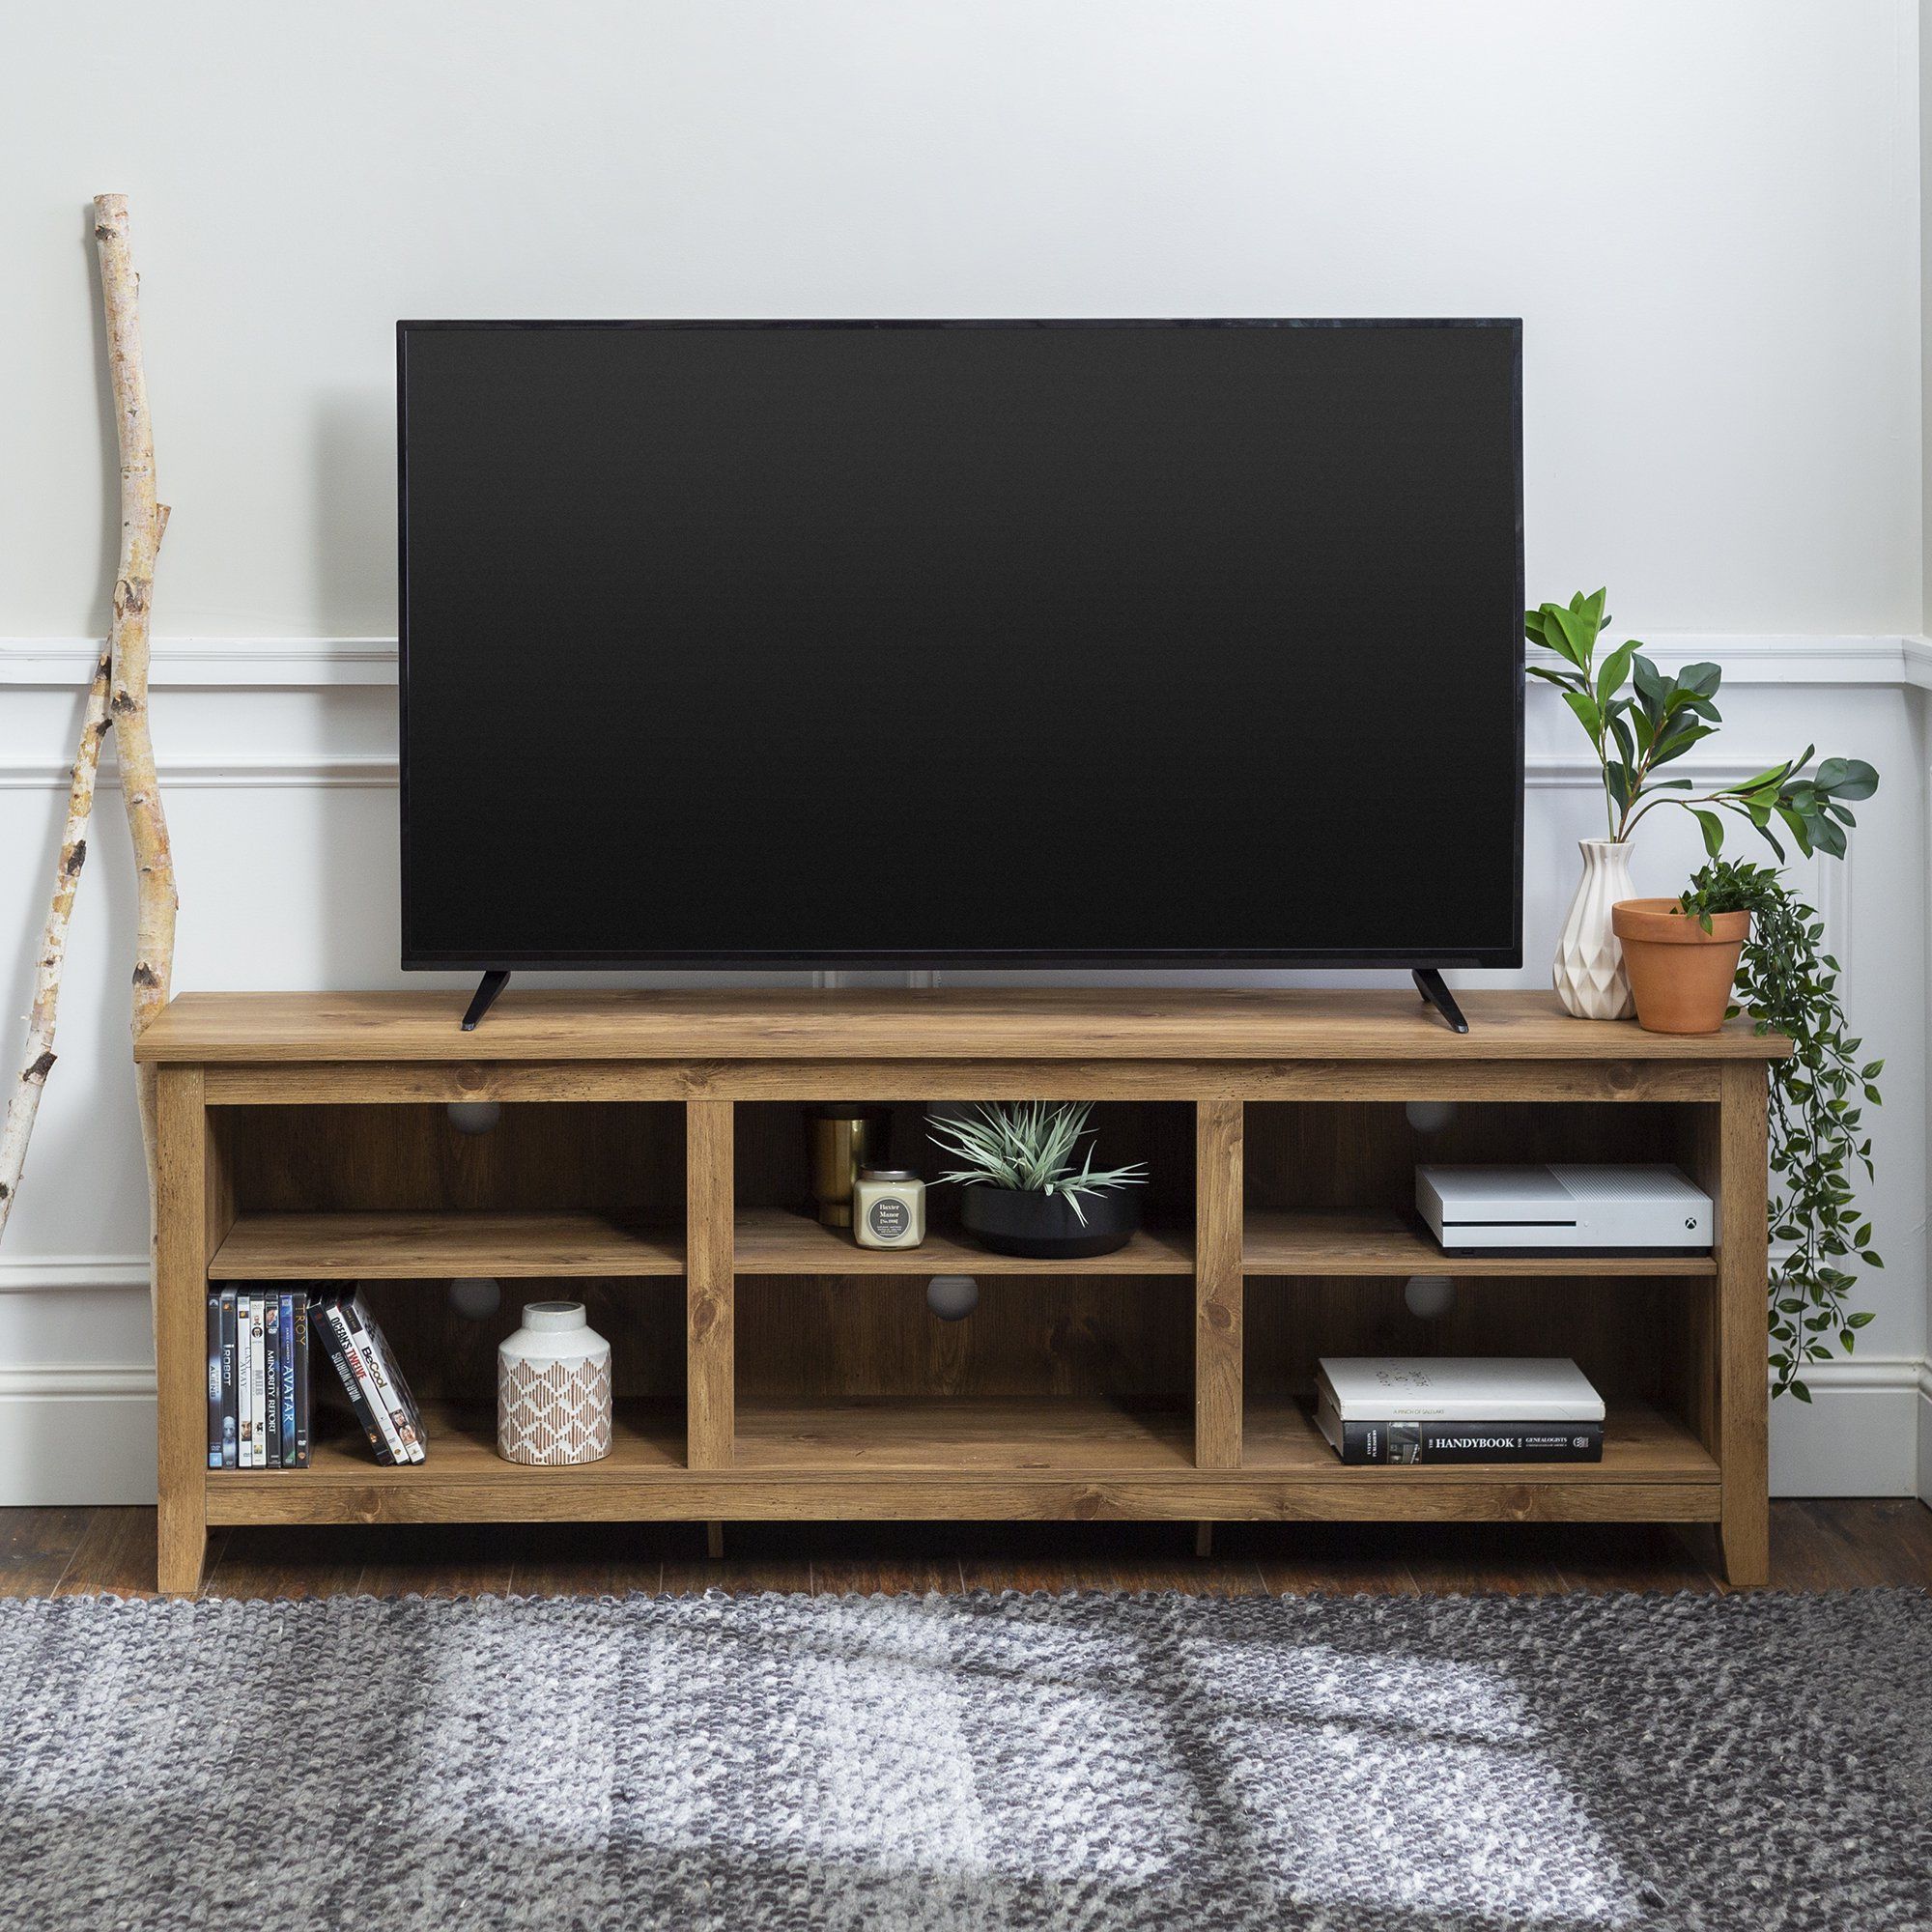 Woven Paths Open Storage Tv Stand For Tvs Up To 80 Regarding Woven Paths Open Storage Tv Stands With Multiple Finishes (View 3 of 15)